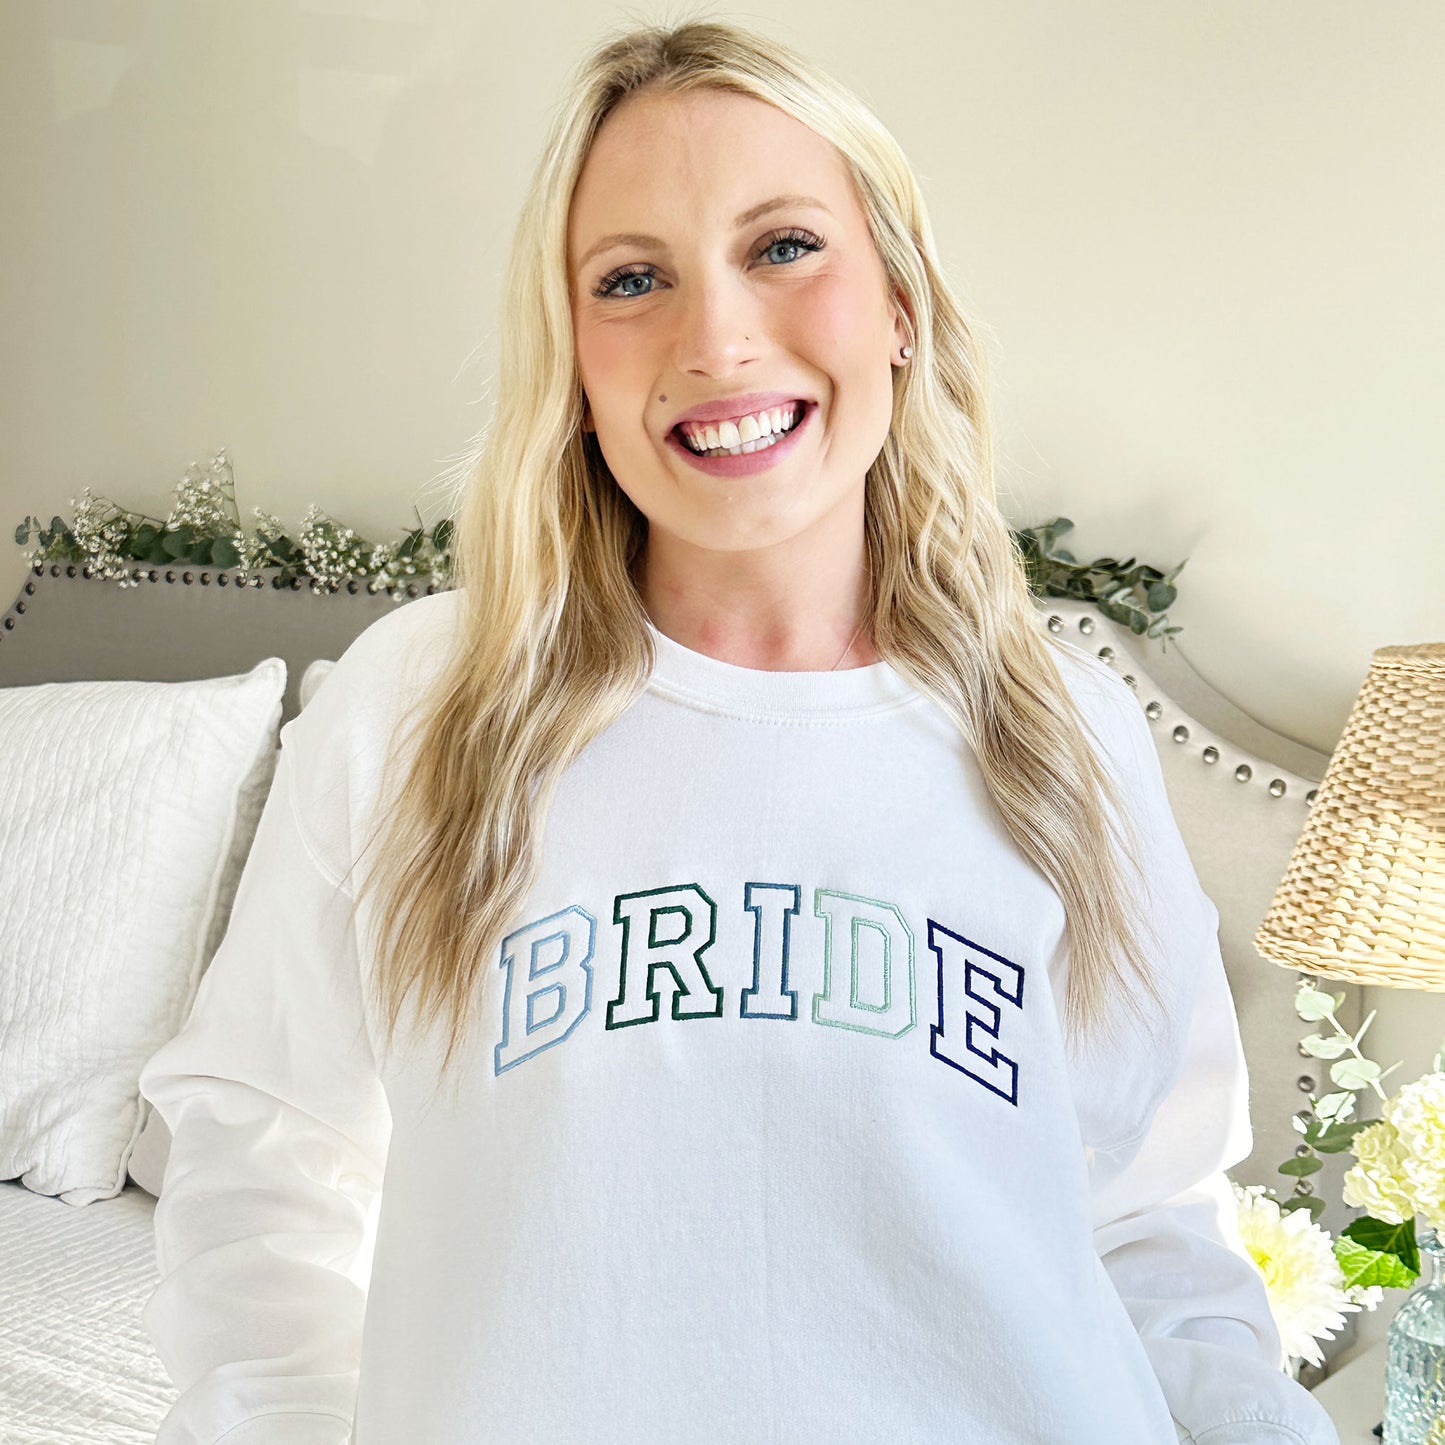 bride wearing a white crewneck sweatshirt with bride embroidered across the chest in a varsity font and blue and green thread